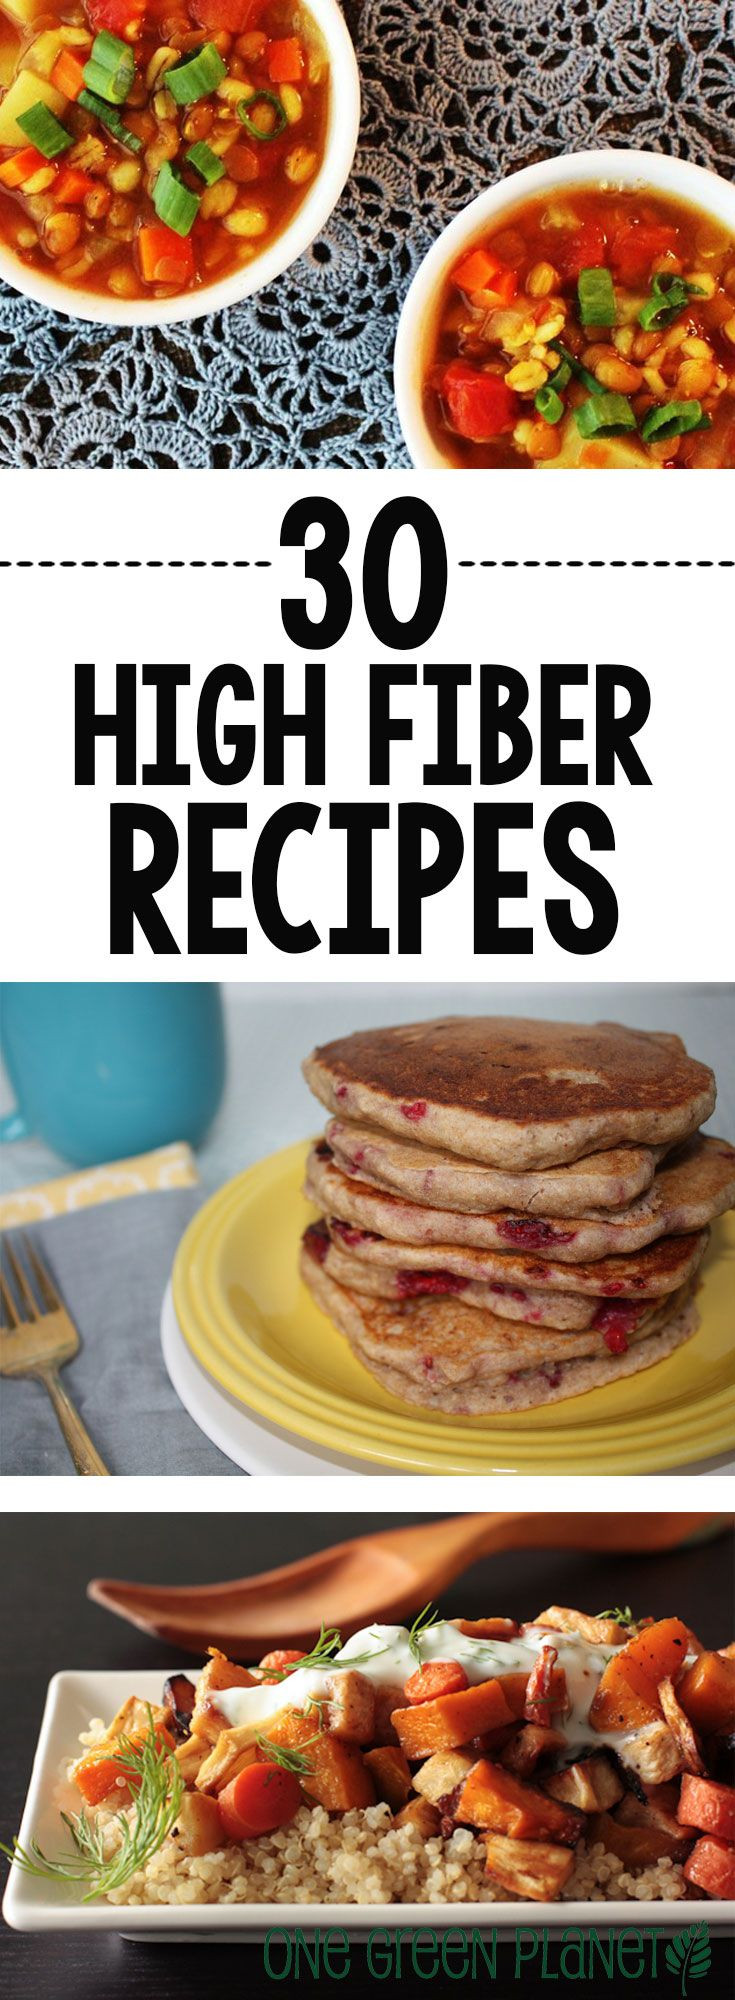 High Fiber Recipes For Lunch
 100 Diverticulitis Recipes on Pinterest